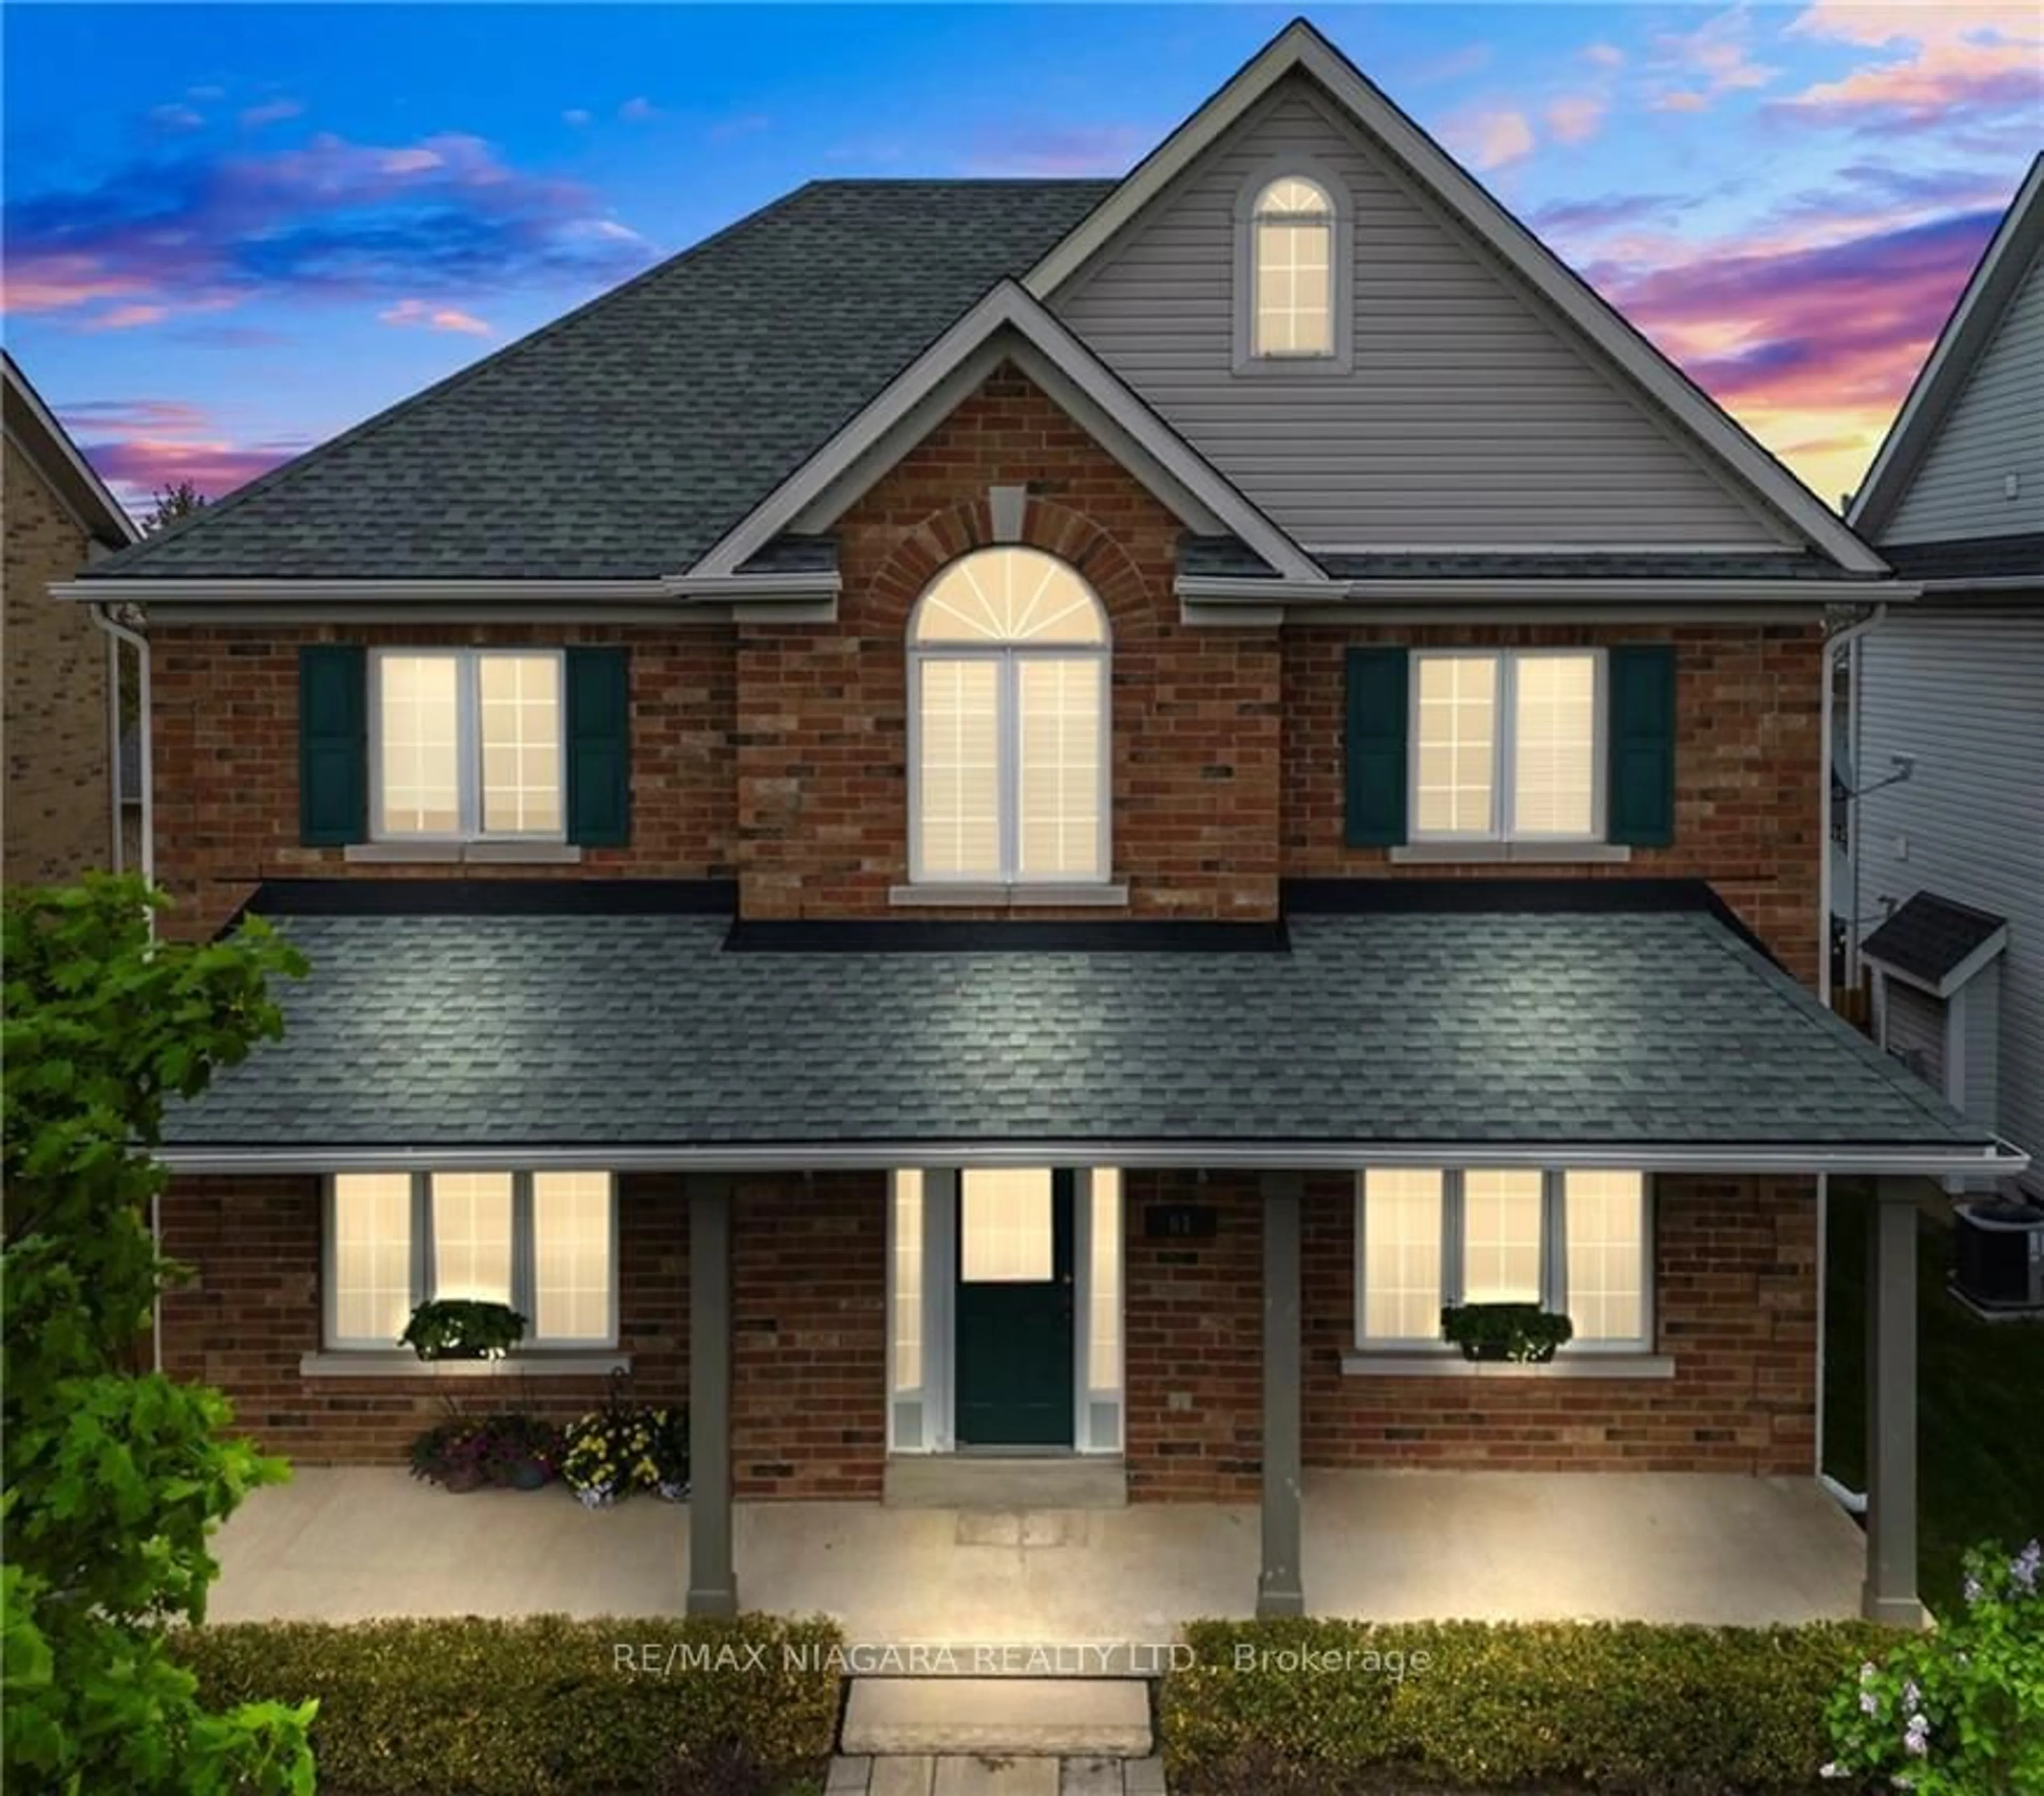 Home with brick exterior material for 61 Niagara On The Green Blvd, Niagara-on-the-Lake Ontario L0S 1J0